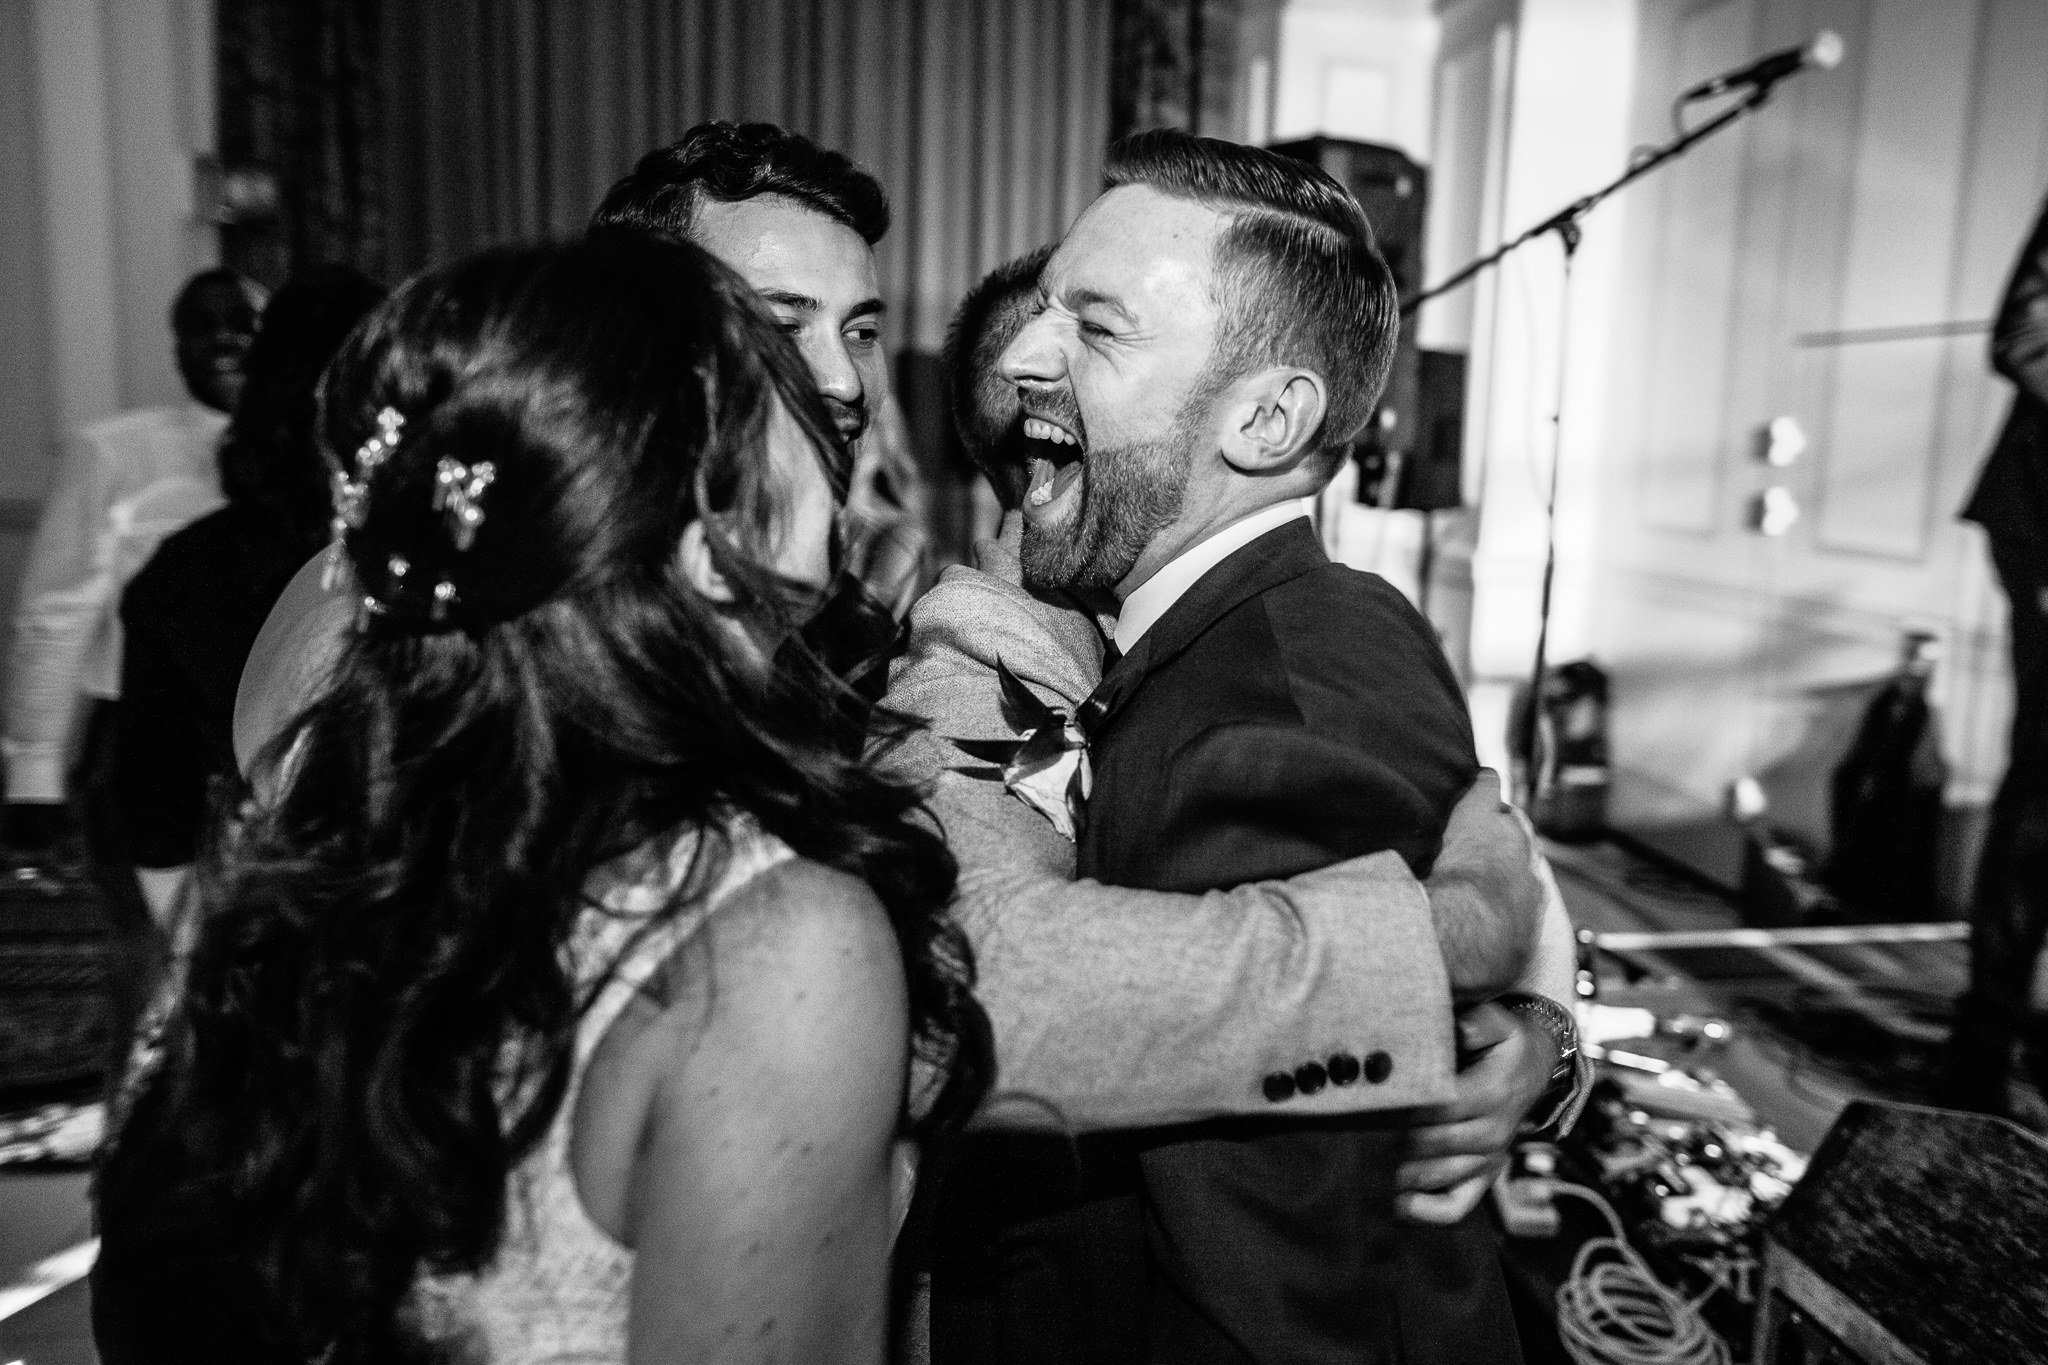  Groom being hugged on the dance fllor 